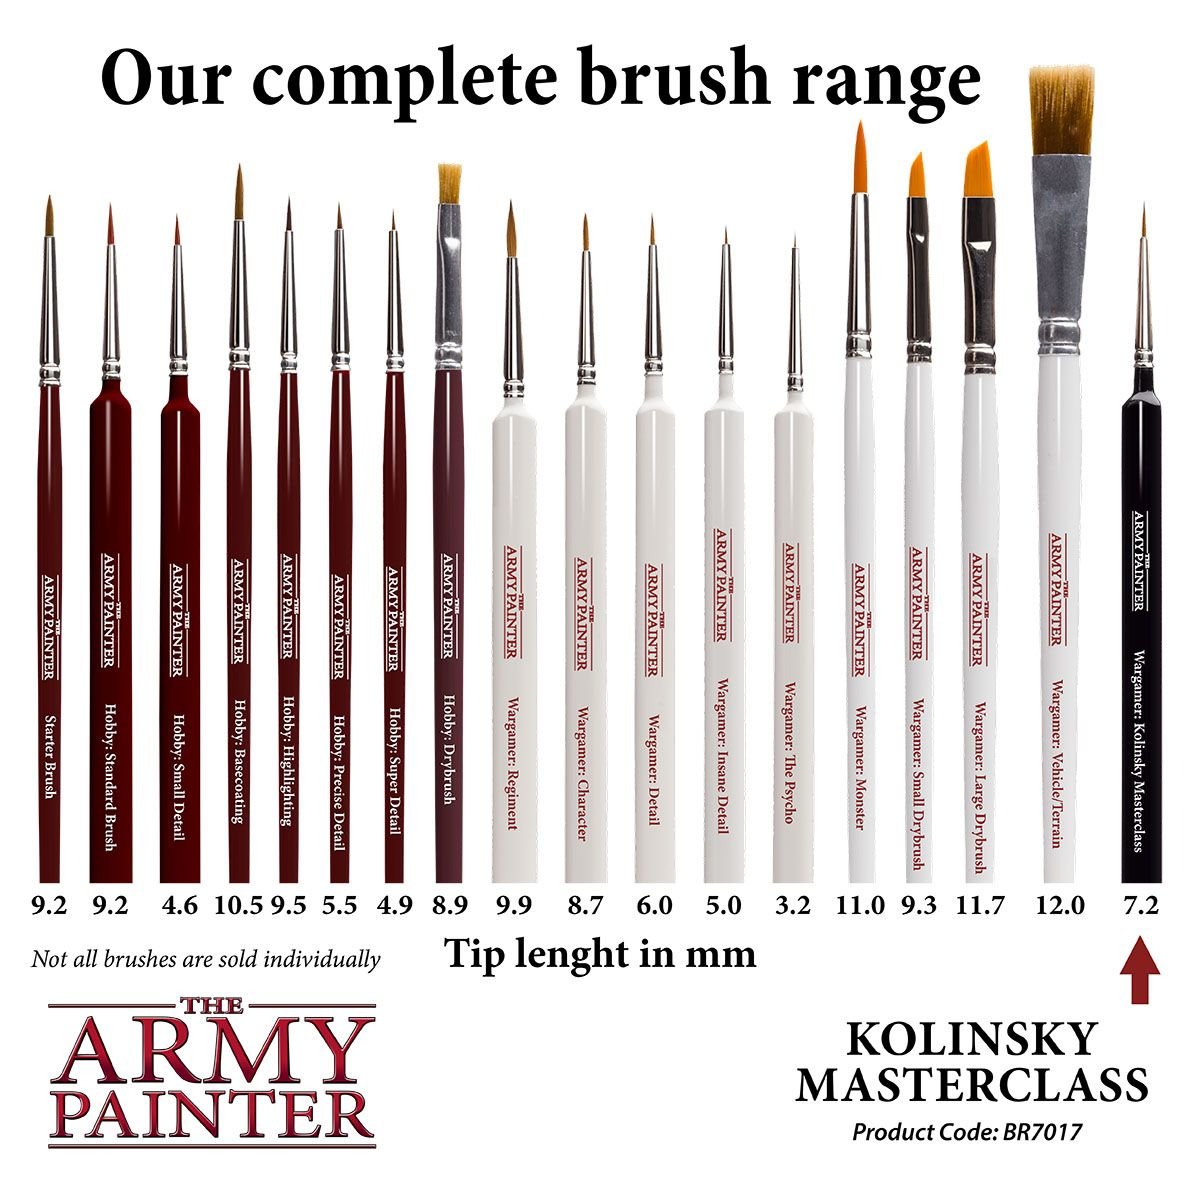 Army Painter Masterclass Drybrush Set For Painting Miniatures: How